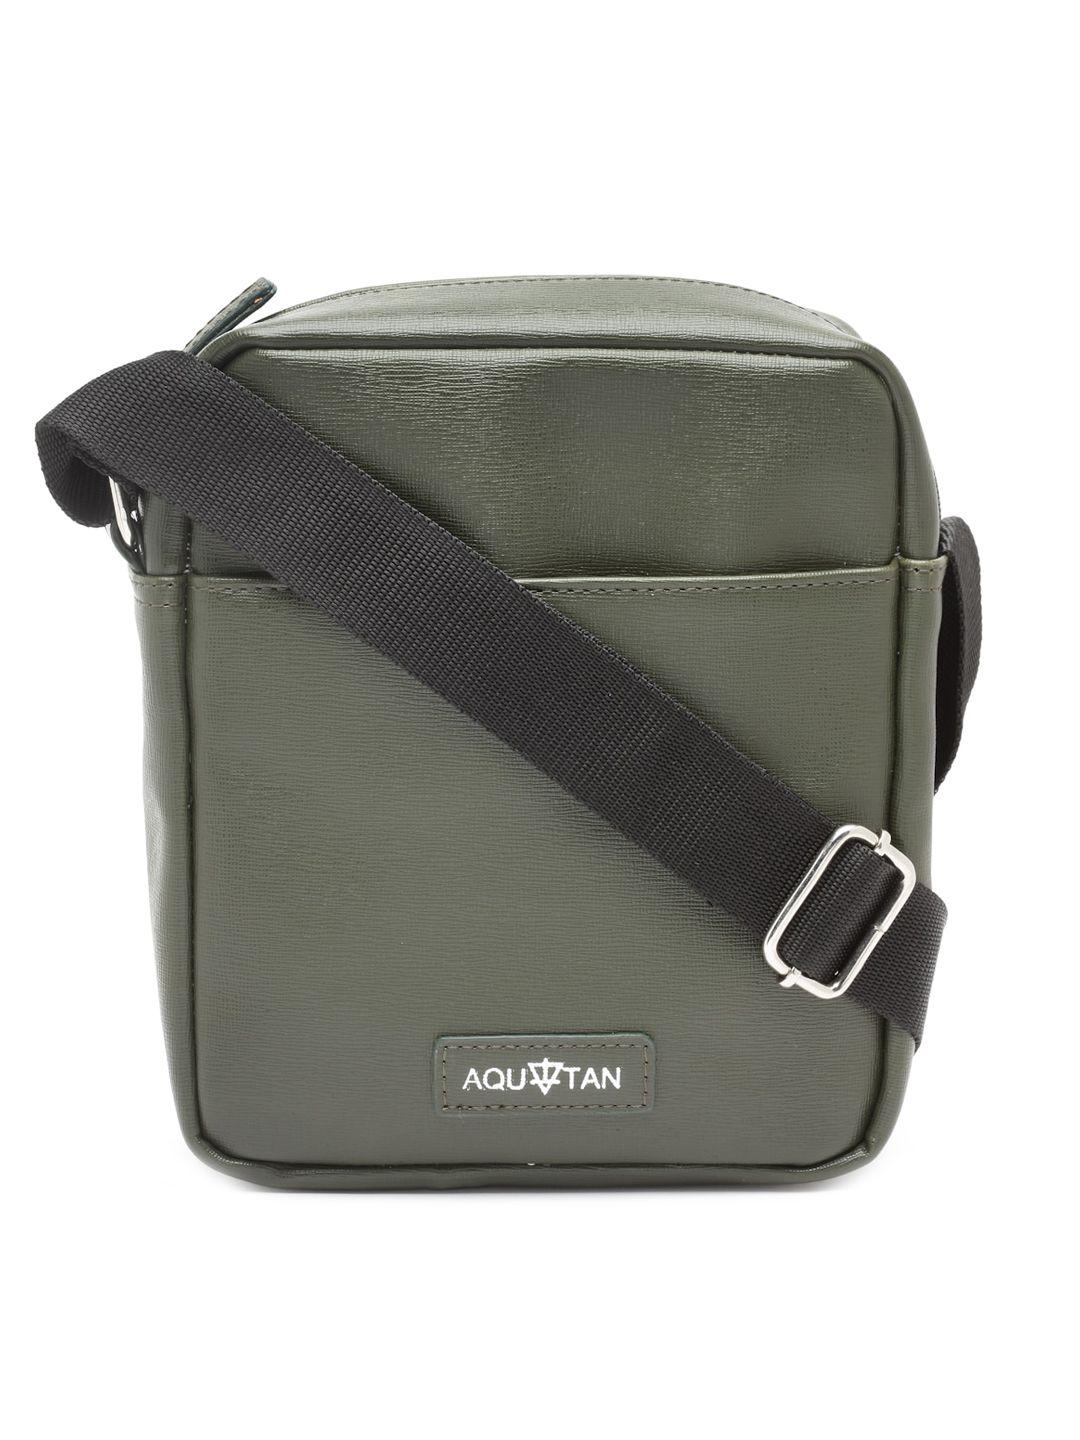 aquatan olive green pu structured sling bag with tasselled